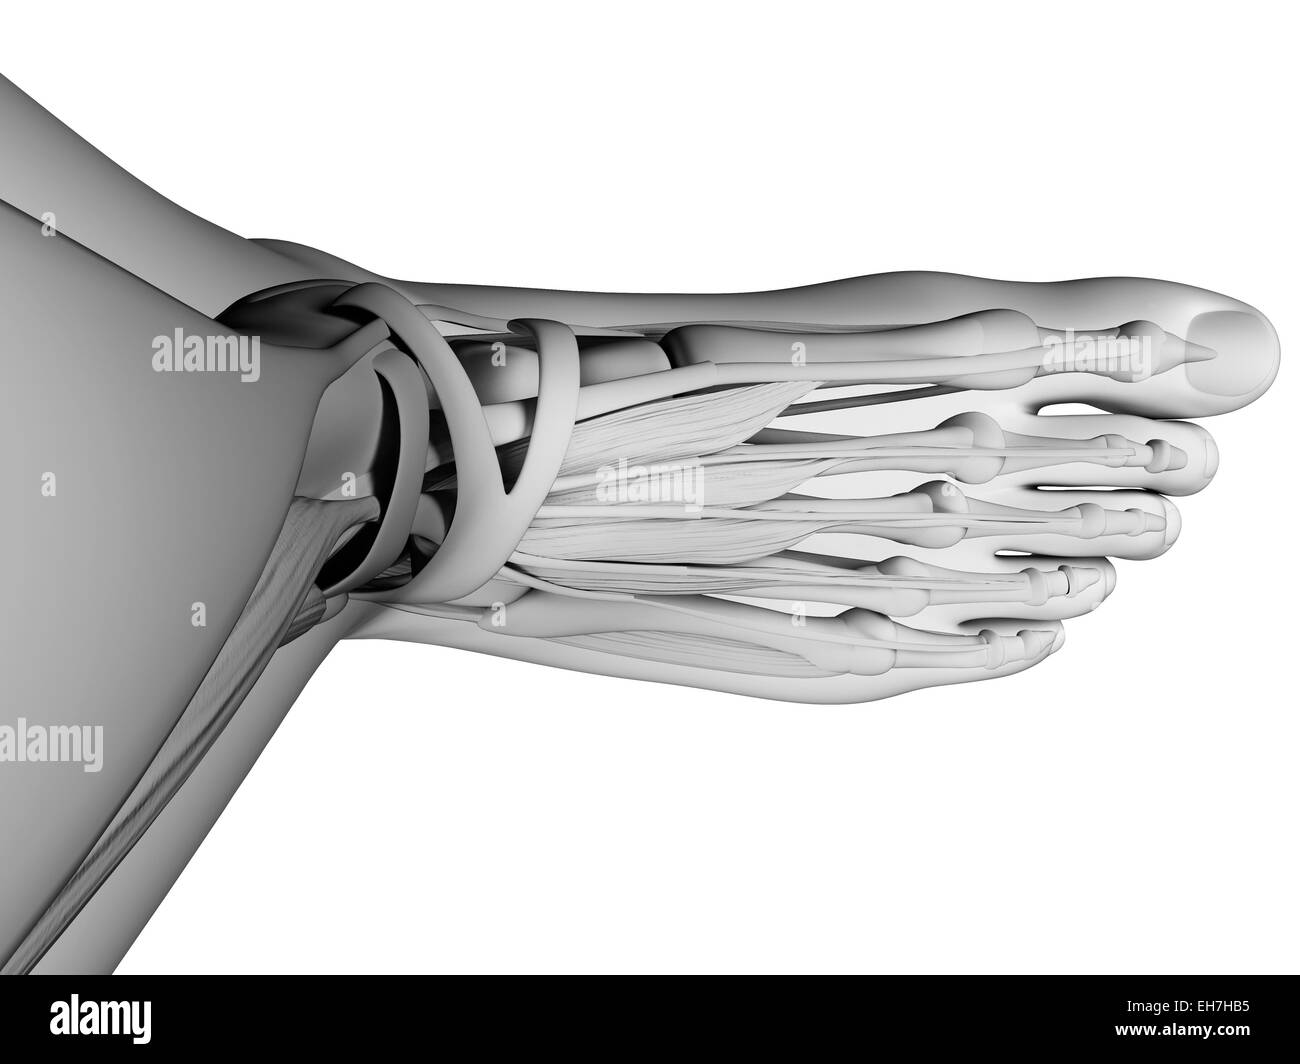 Human foot anatomy Black and White Stock Photos & Images - Alamy